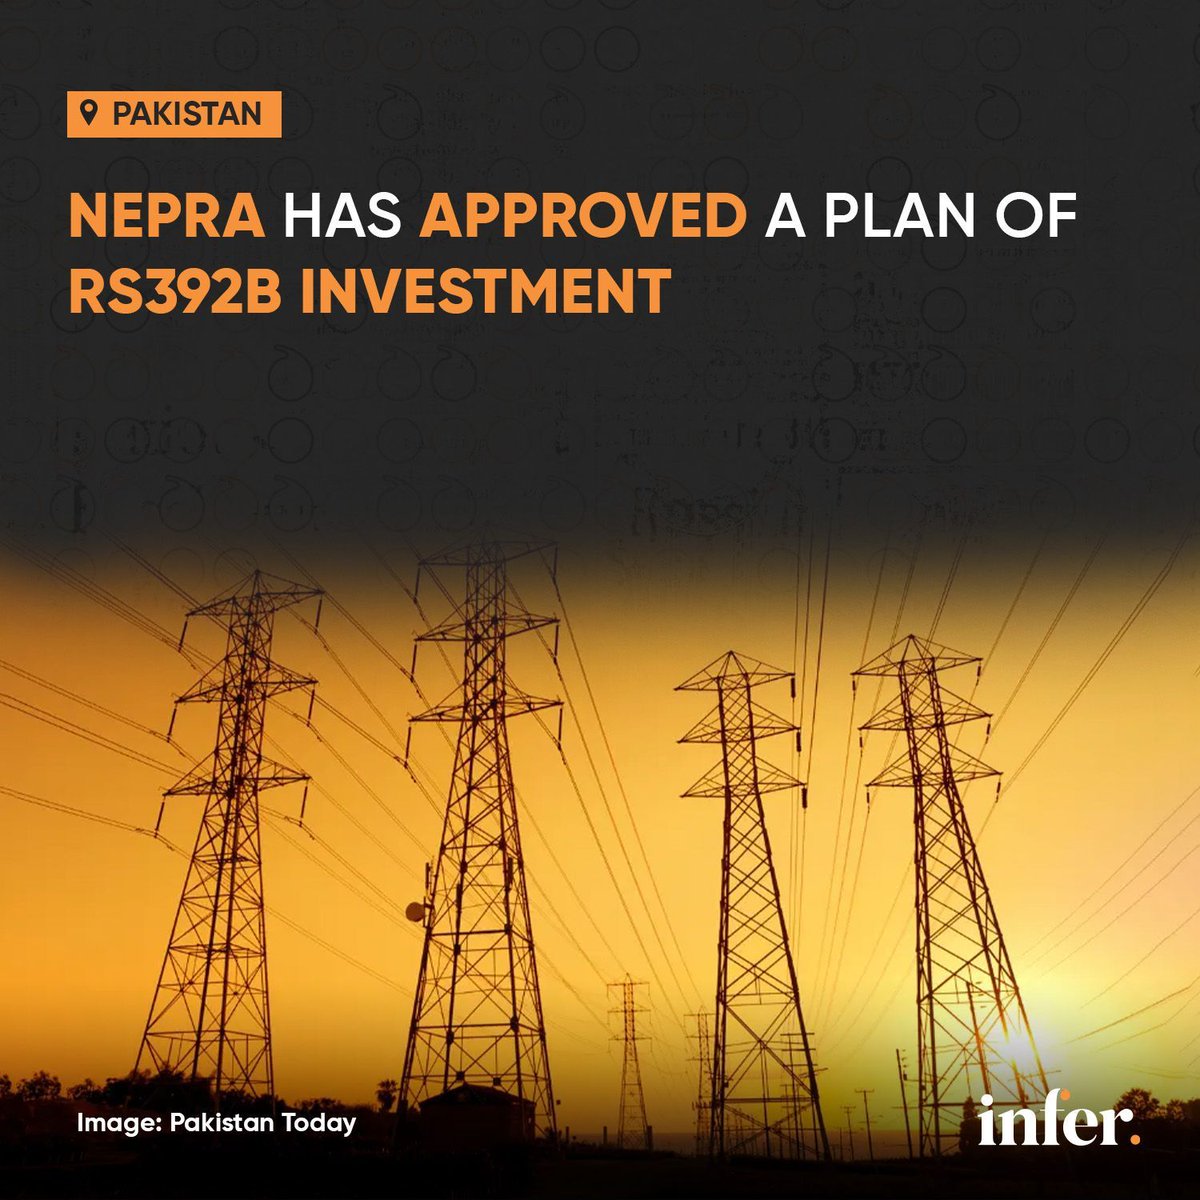 🚨: #Nepra greenlights Rs392 billion investment plan for K-Electric to upgrade power network. Reduced from proposed Rs484 billion. 

#Nepra #KE #Pakistan #ElectricityBill #infer #BreakingNews